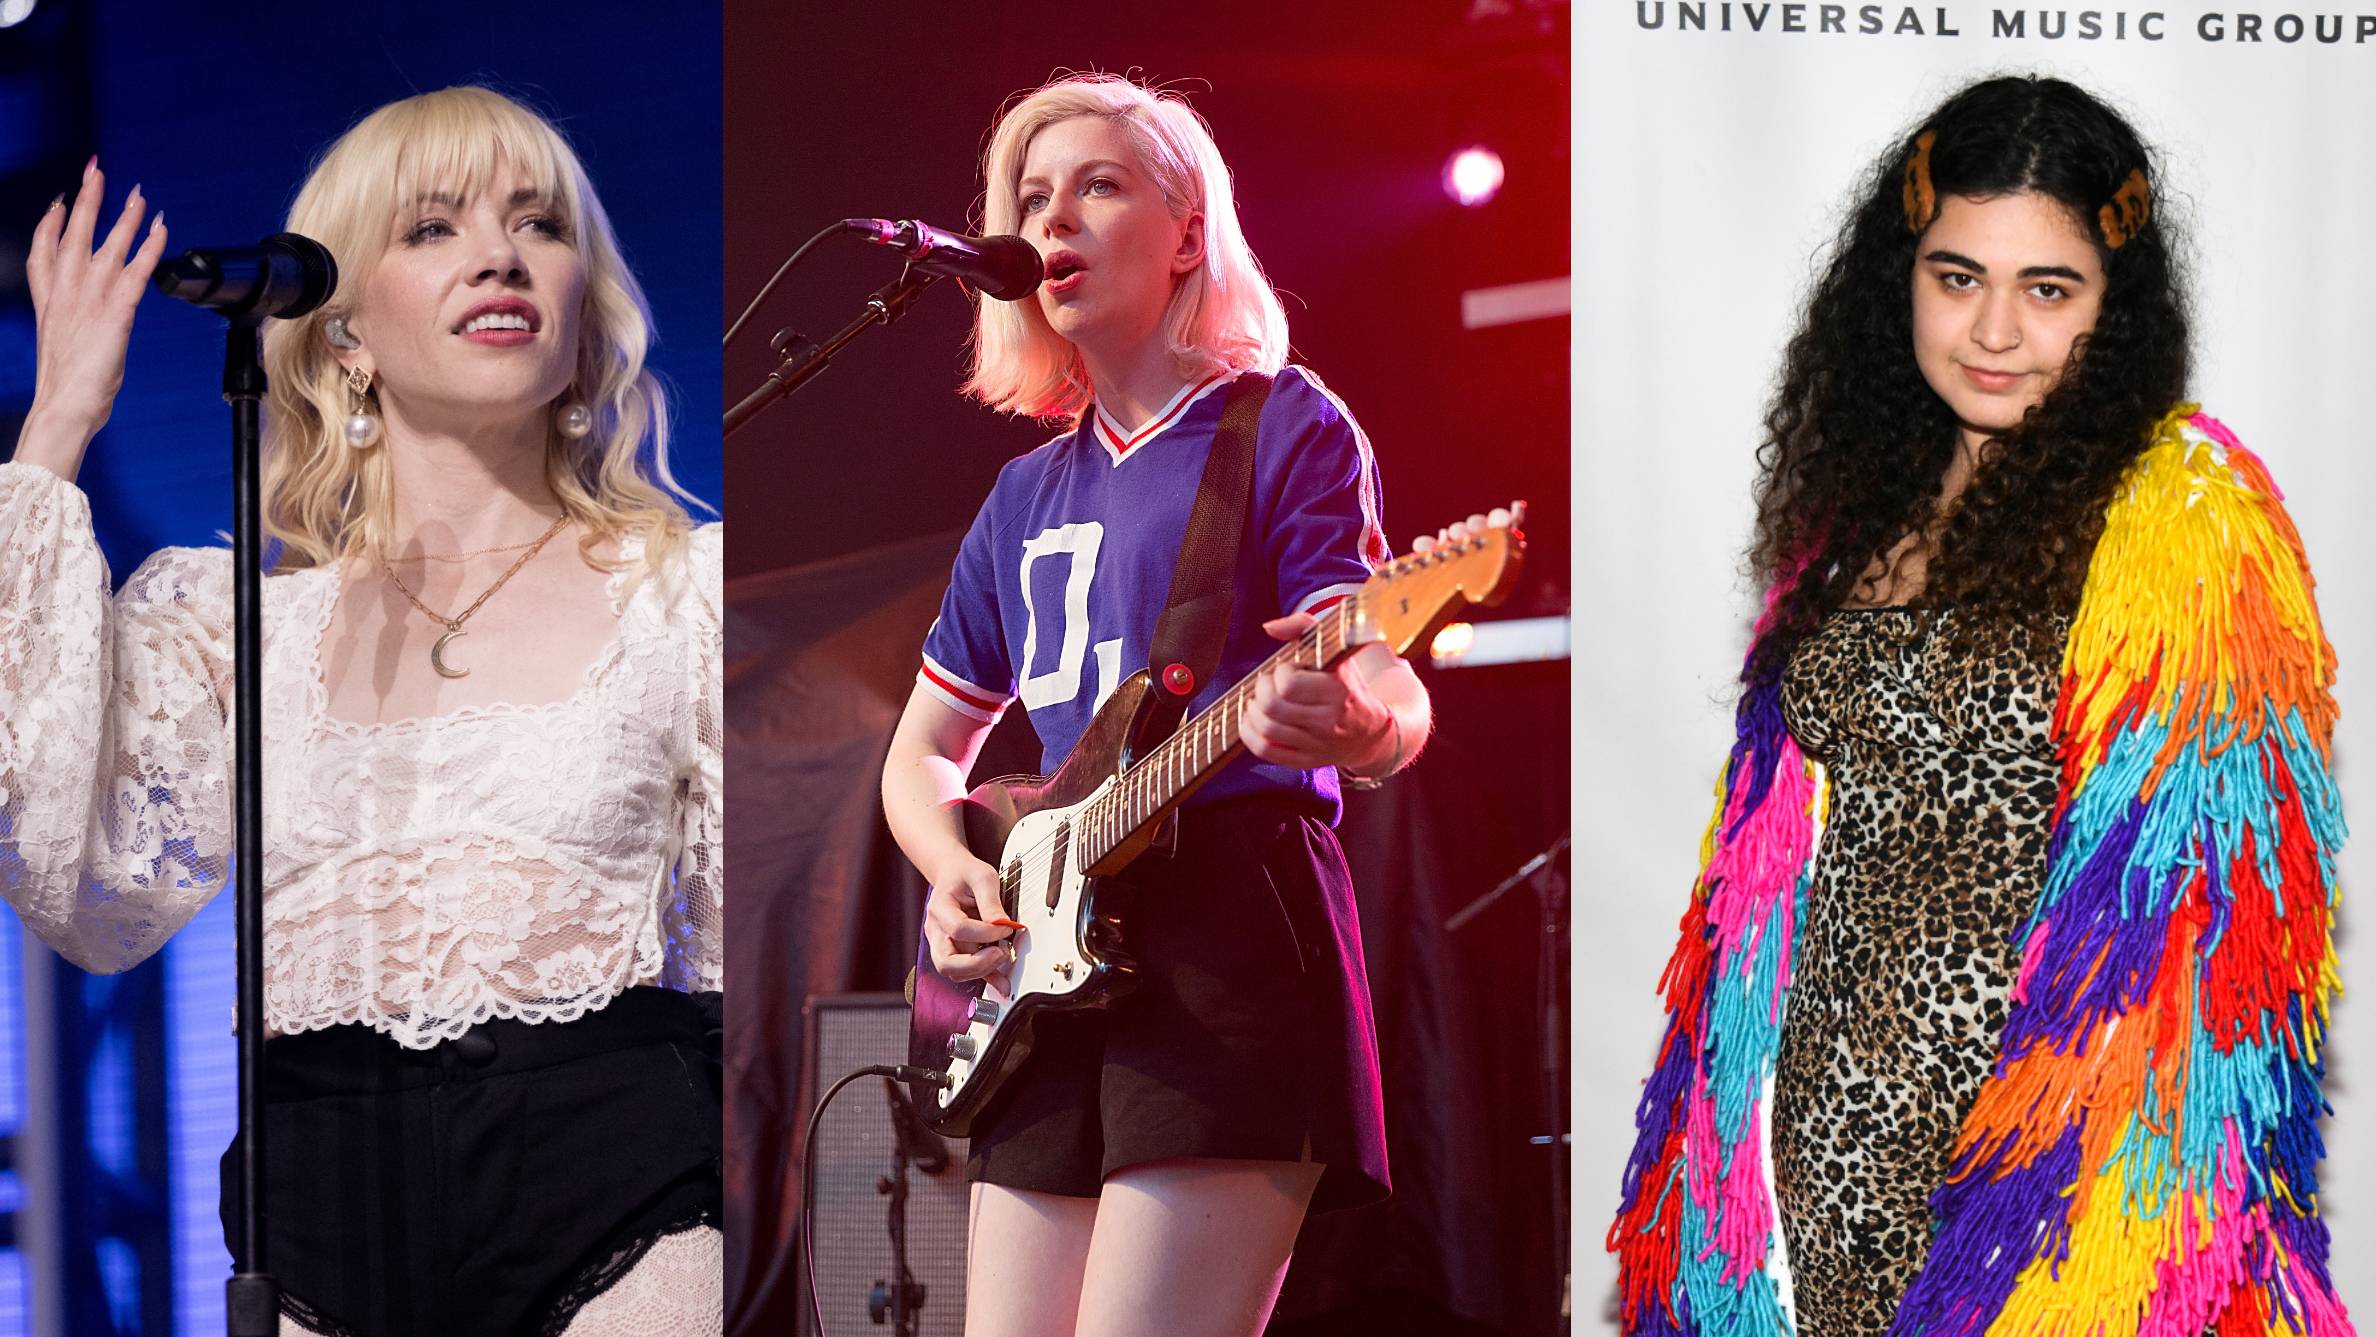 A triptych photo of Carly Rae Jepsen, vocalist Molly Rankin from the band Alvvays, and Remi Wolf